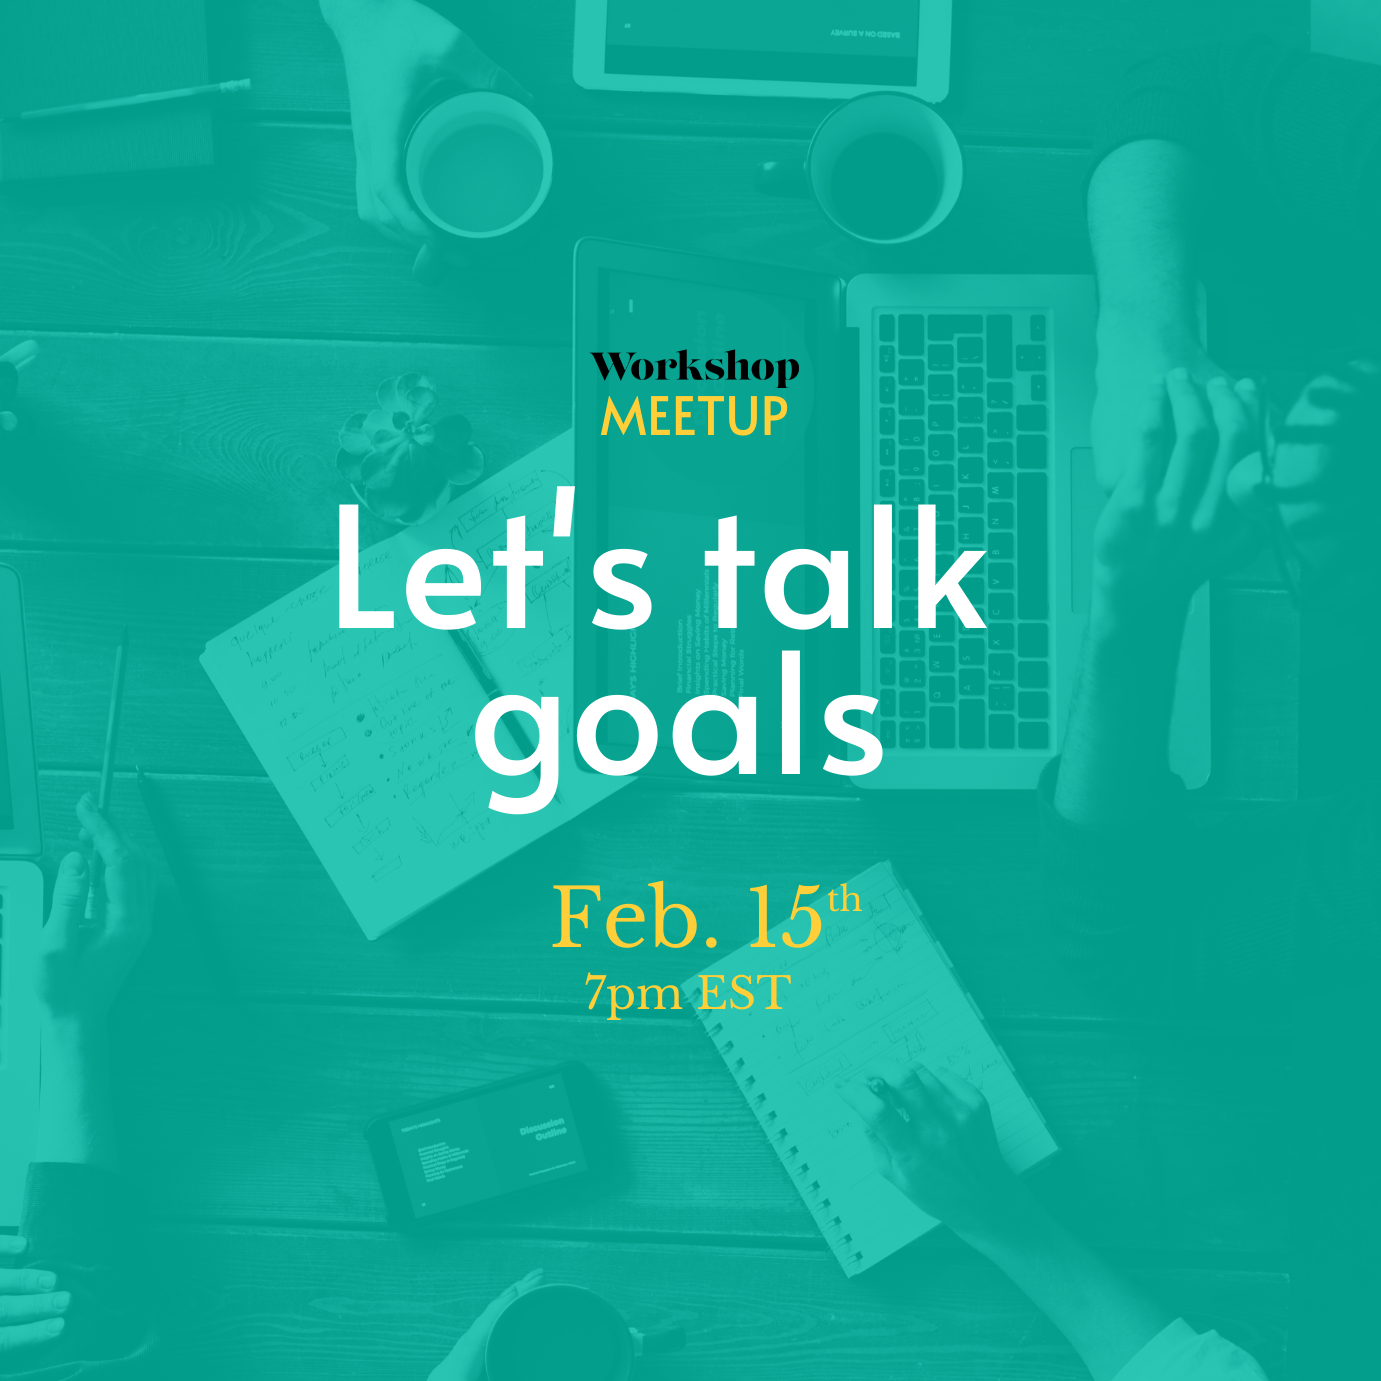 People working around a table with text overlay. Text says: Workshop Meetup. Let's talk goals. Feb. 15, 7pm EST